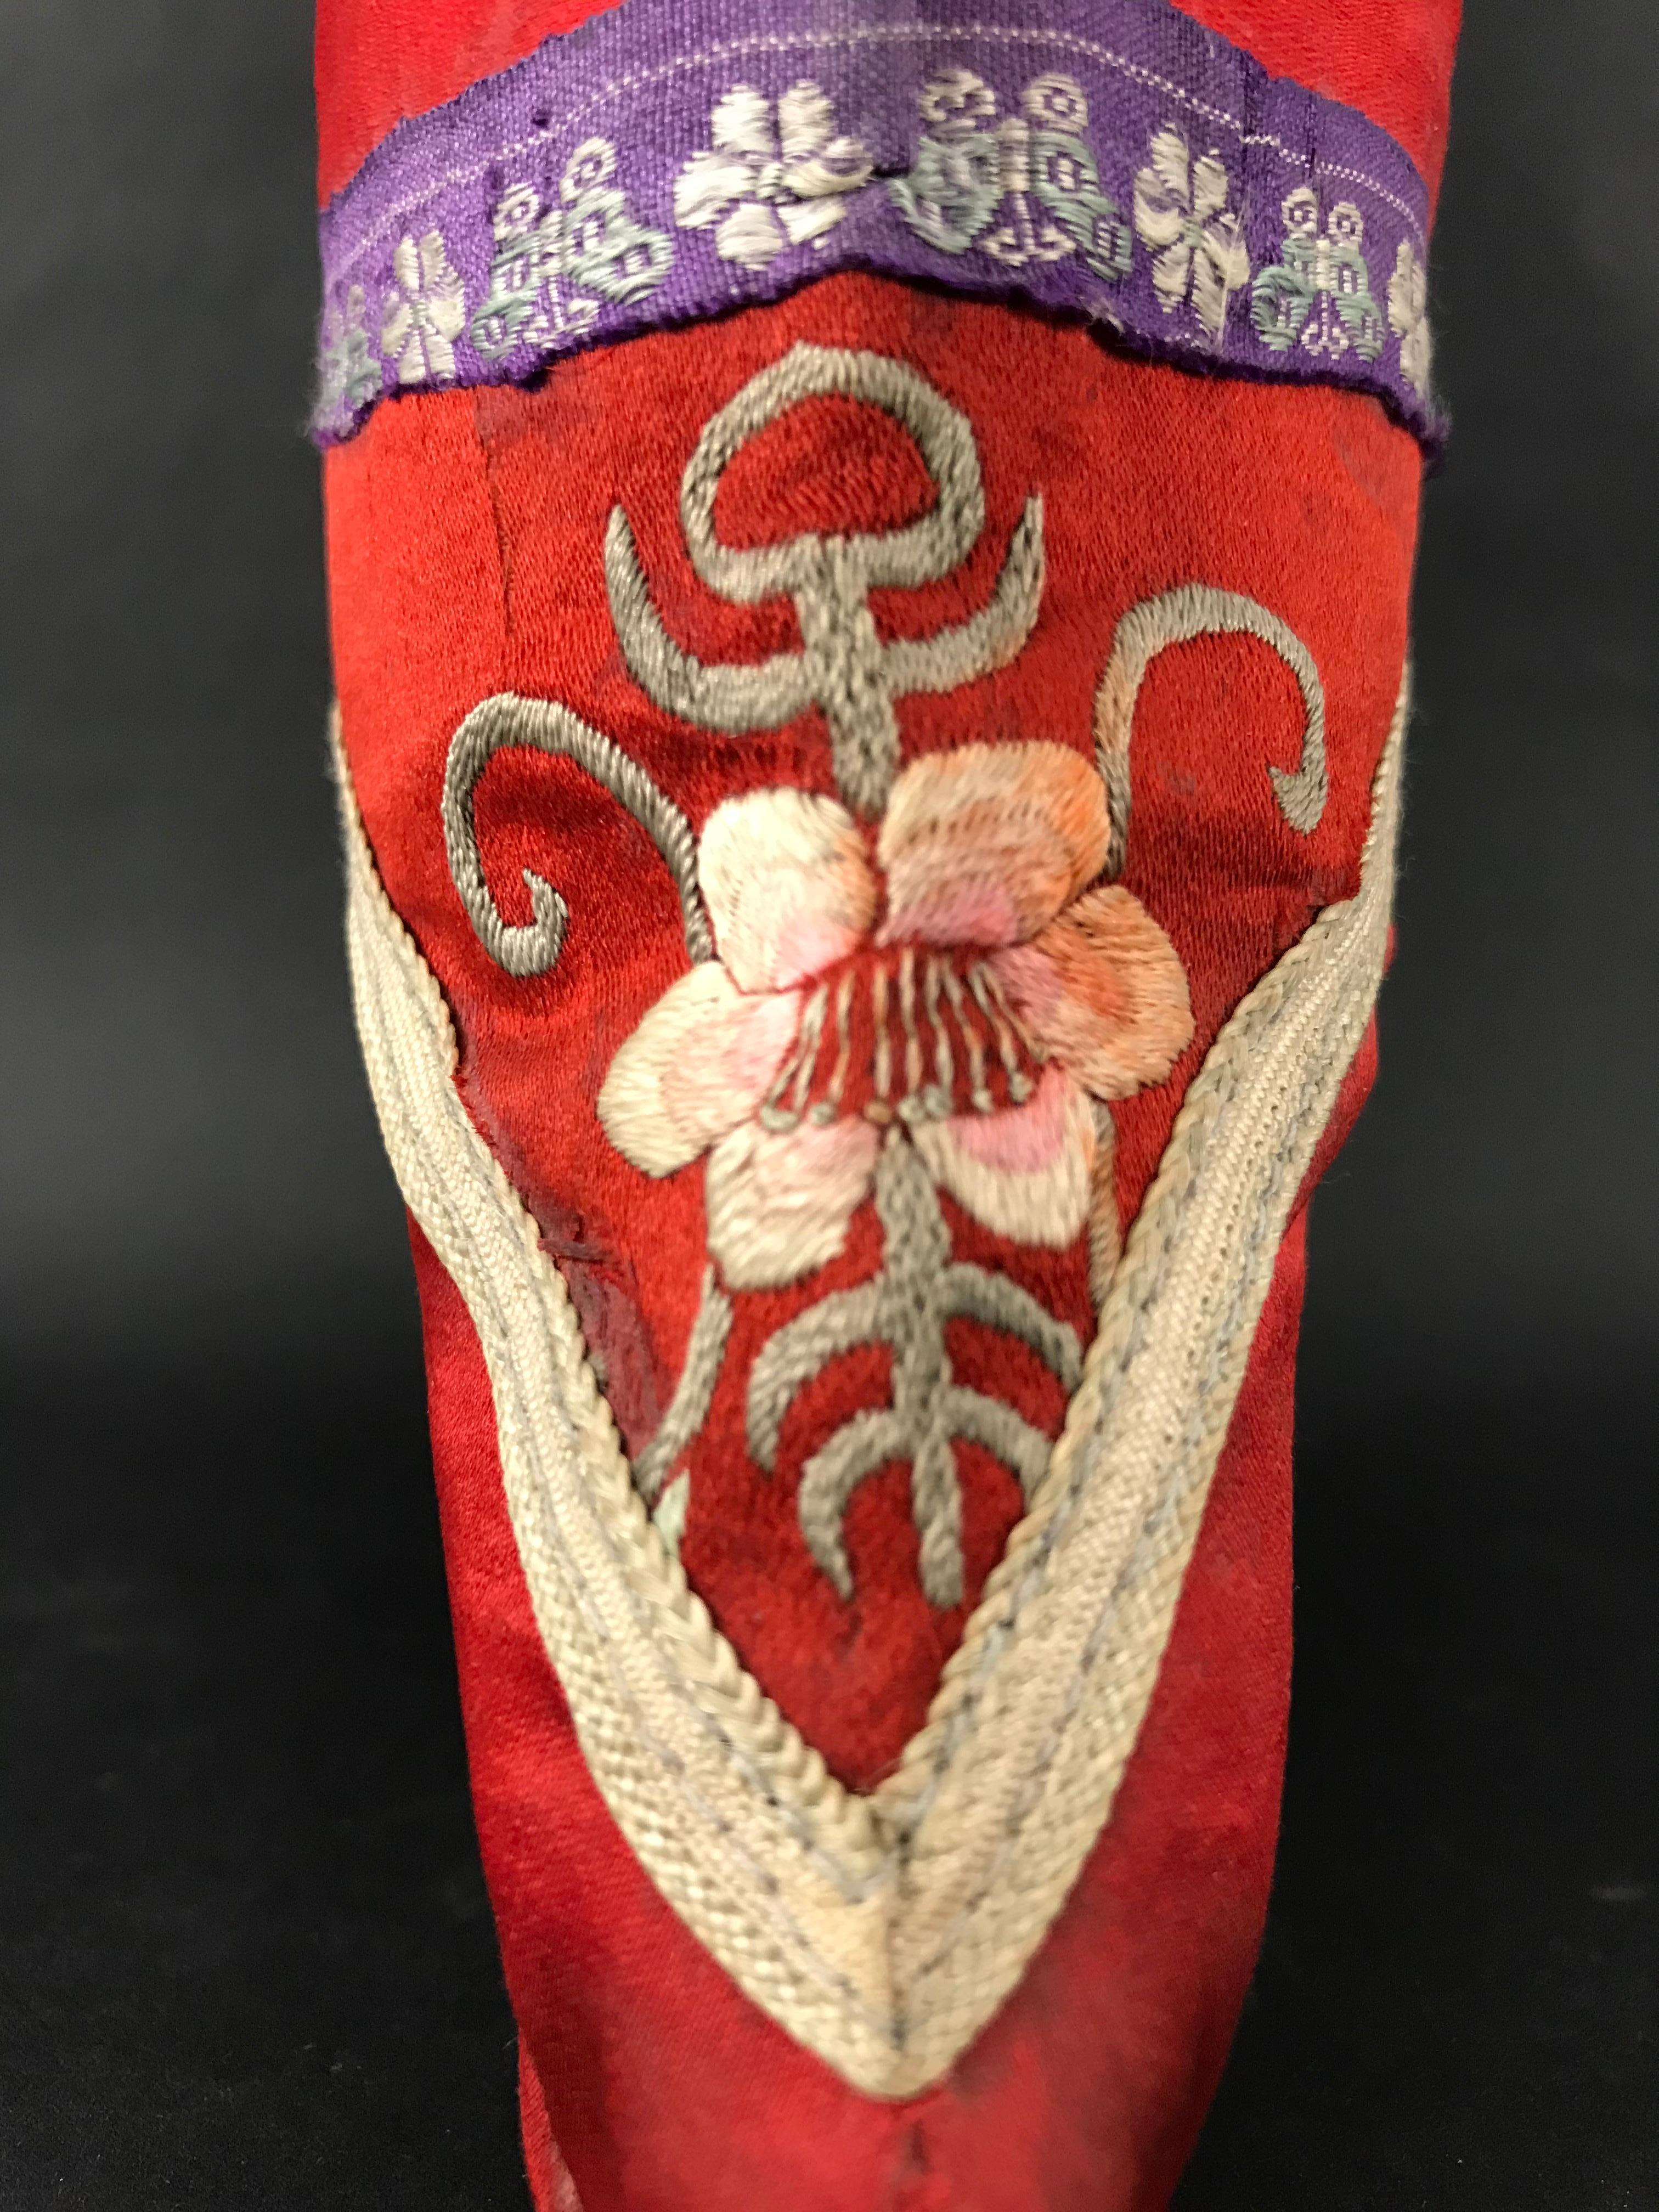 Late 19th Century Woman's Footwear with Bandaged Feet, China, circa 1900